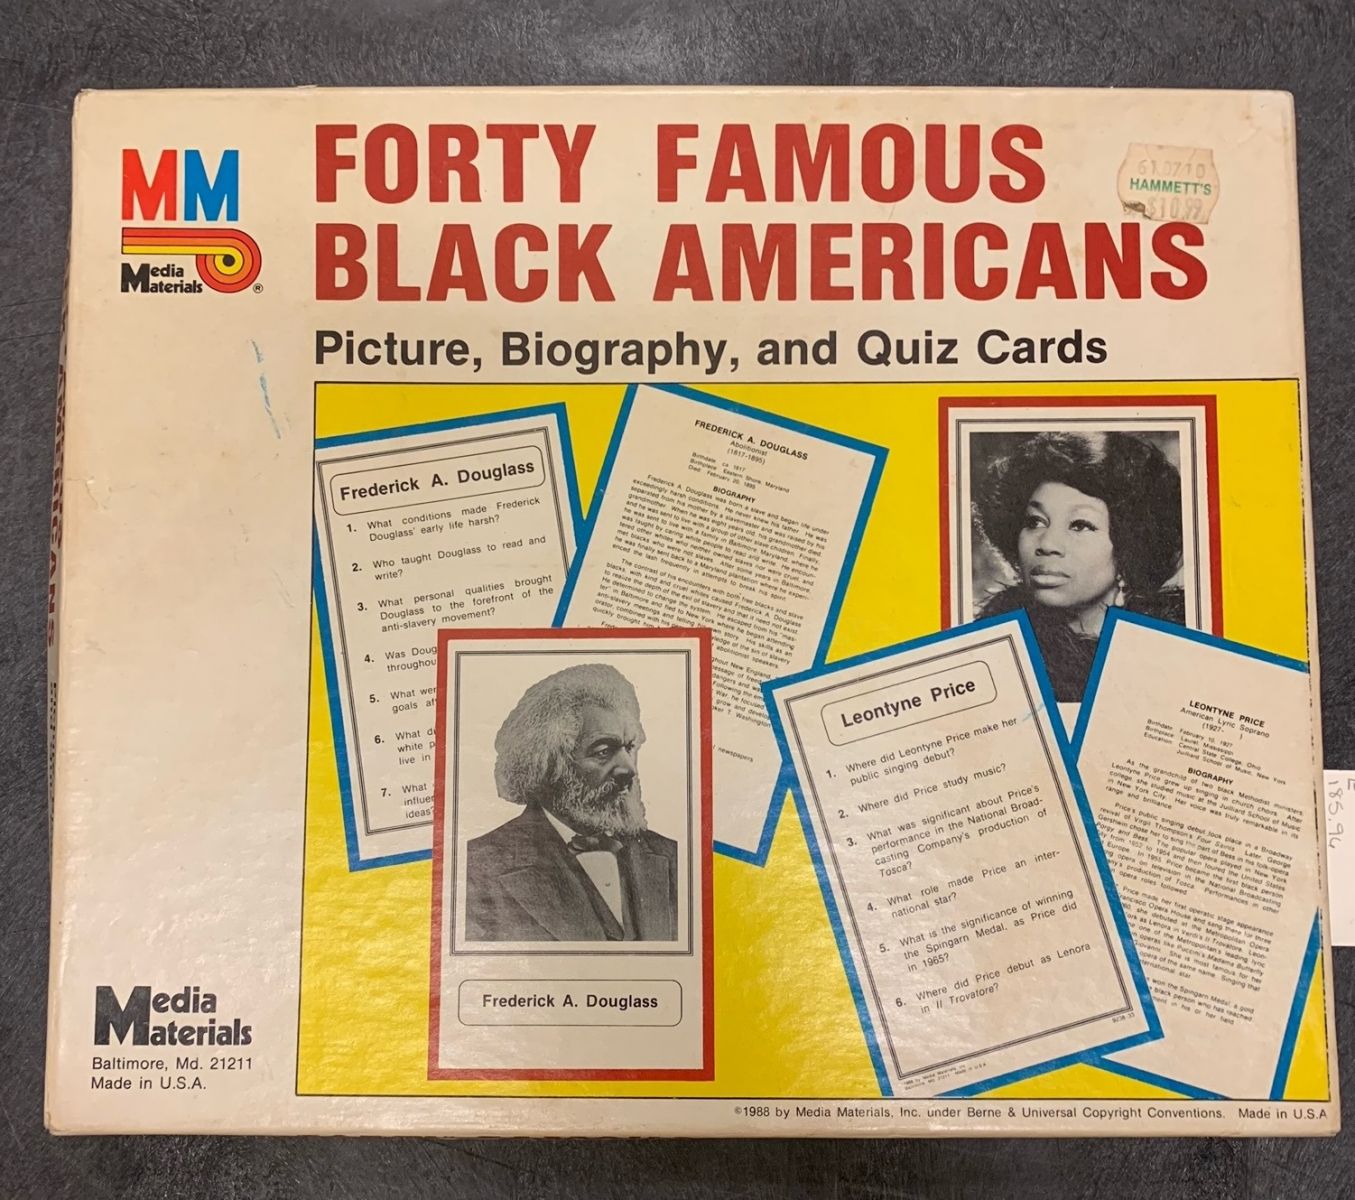 Forty Famous Black Americans game box, showcasing some of the figures mentioned in the game (Forty Famous Black Americans, 1988, id262248, Artifact 3. Racial and Ethnic Ephemera Collection, Mss 1.05). 